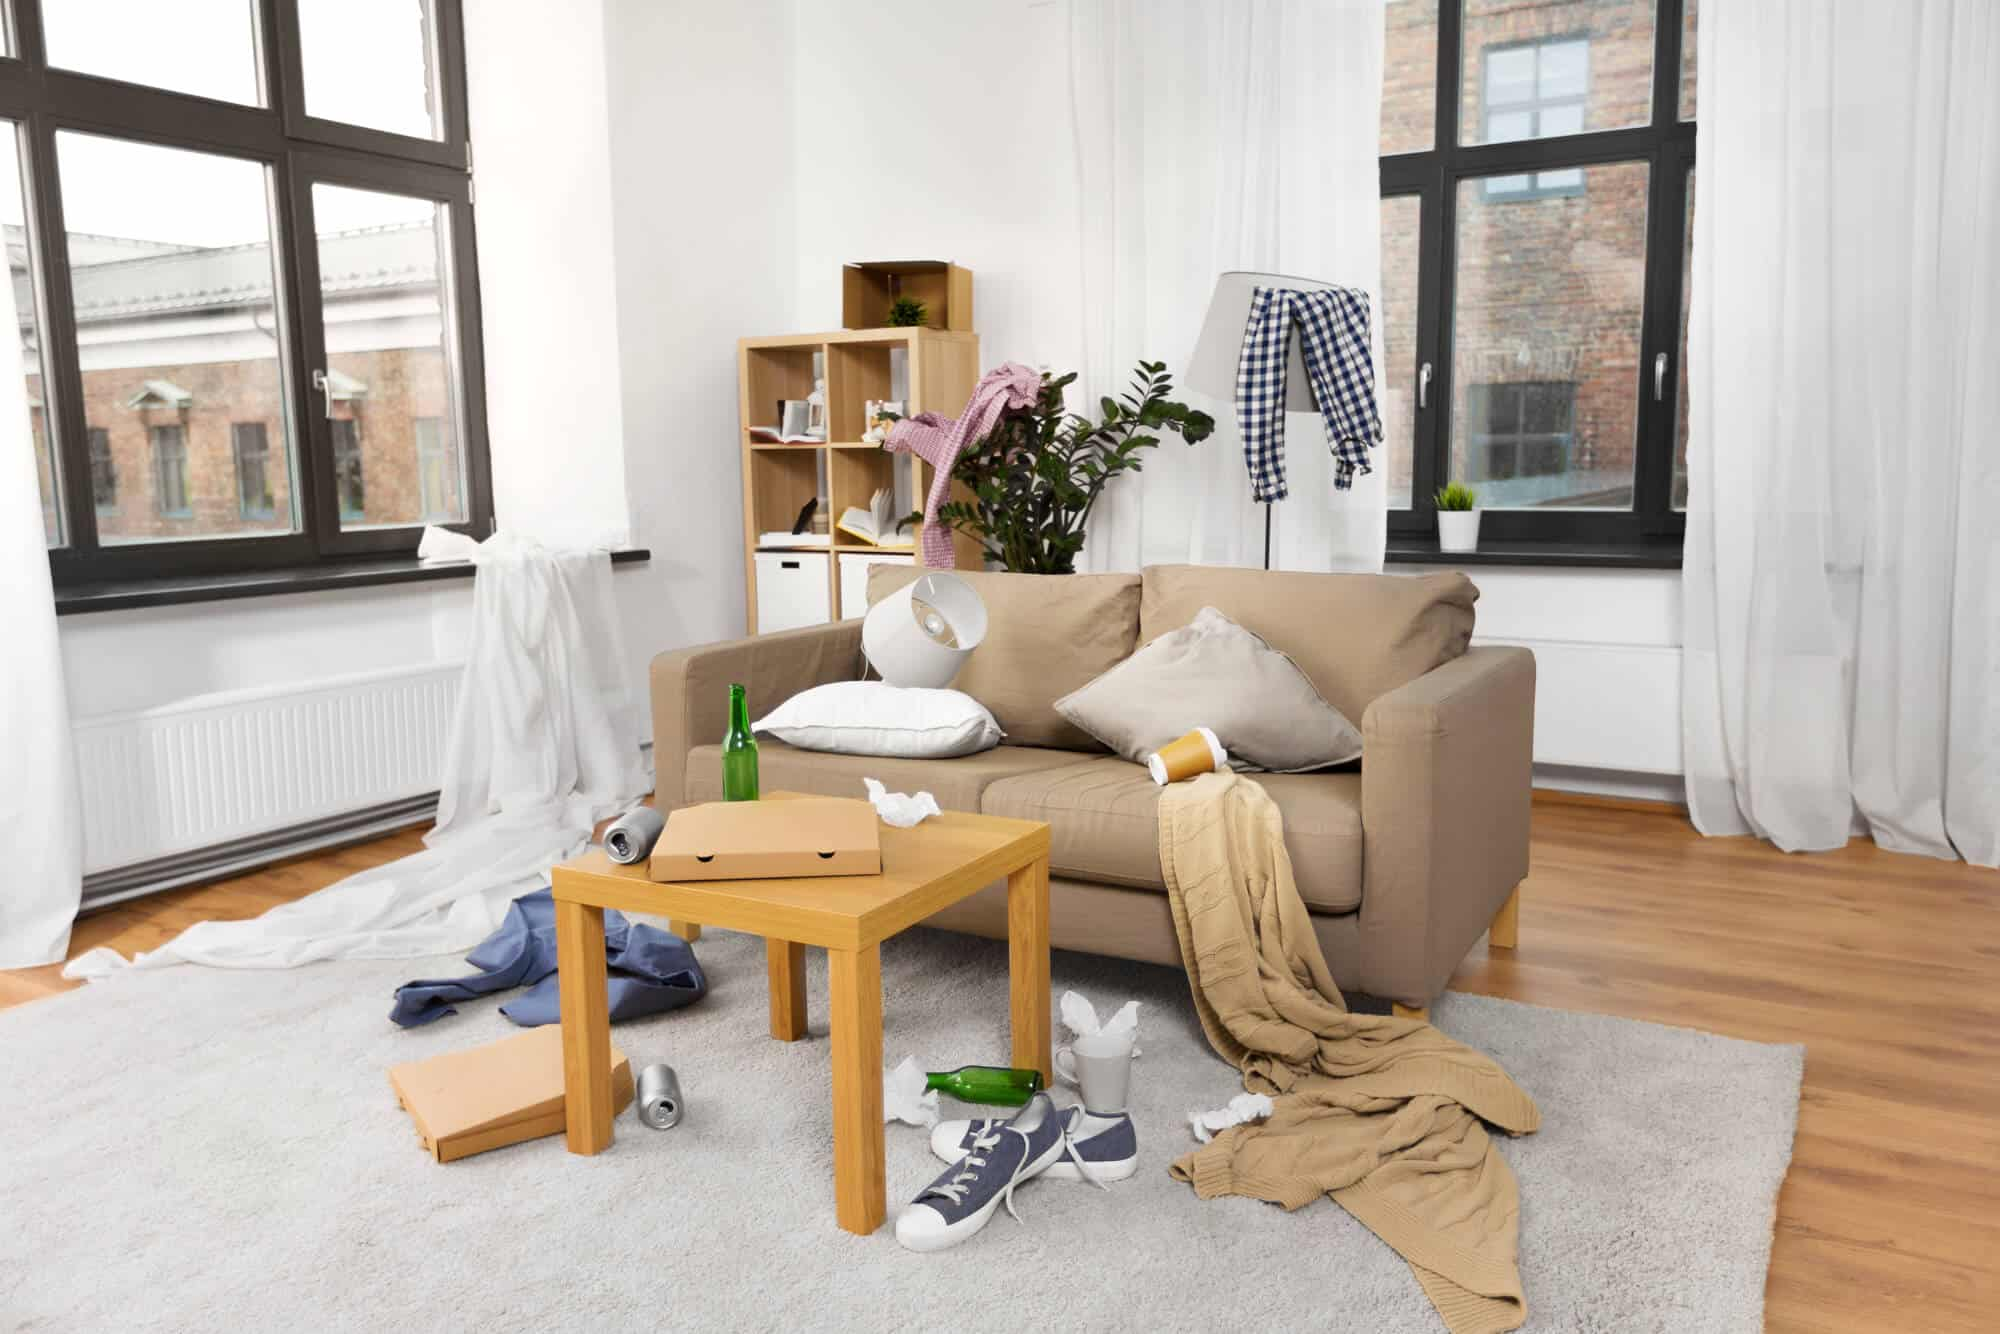 Start the cleaning process by gathering the trash and removing all the clutter in the living room